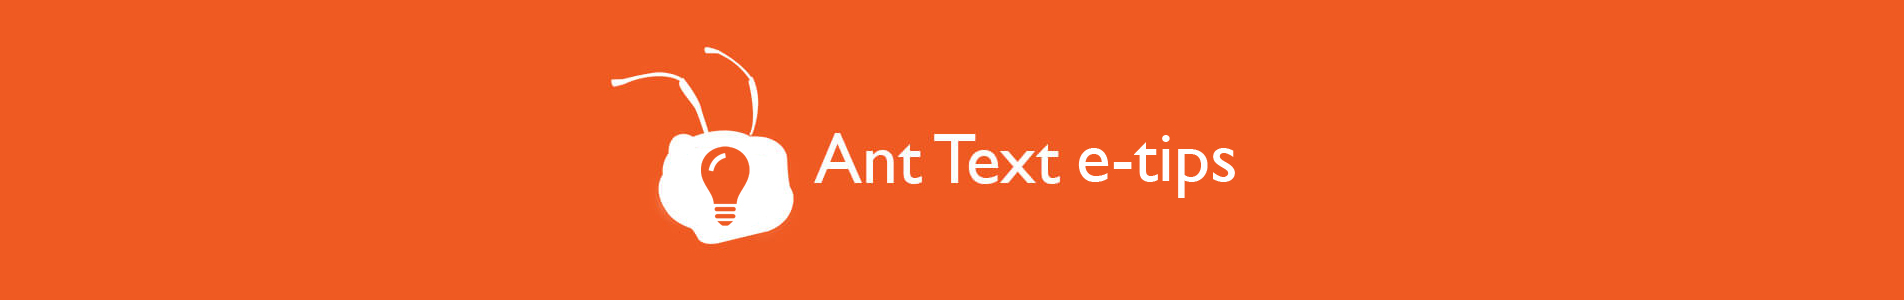 Header with ant head for ant text e-tips